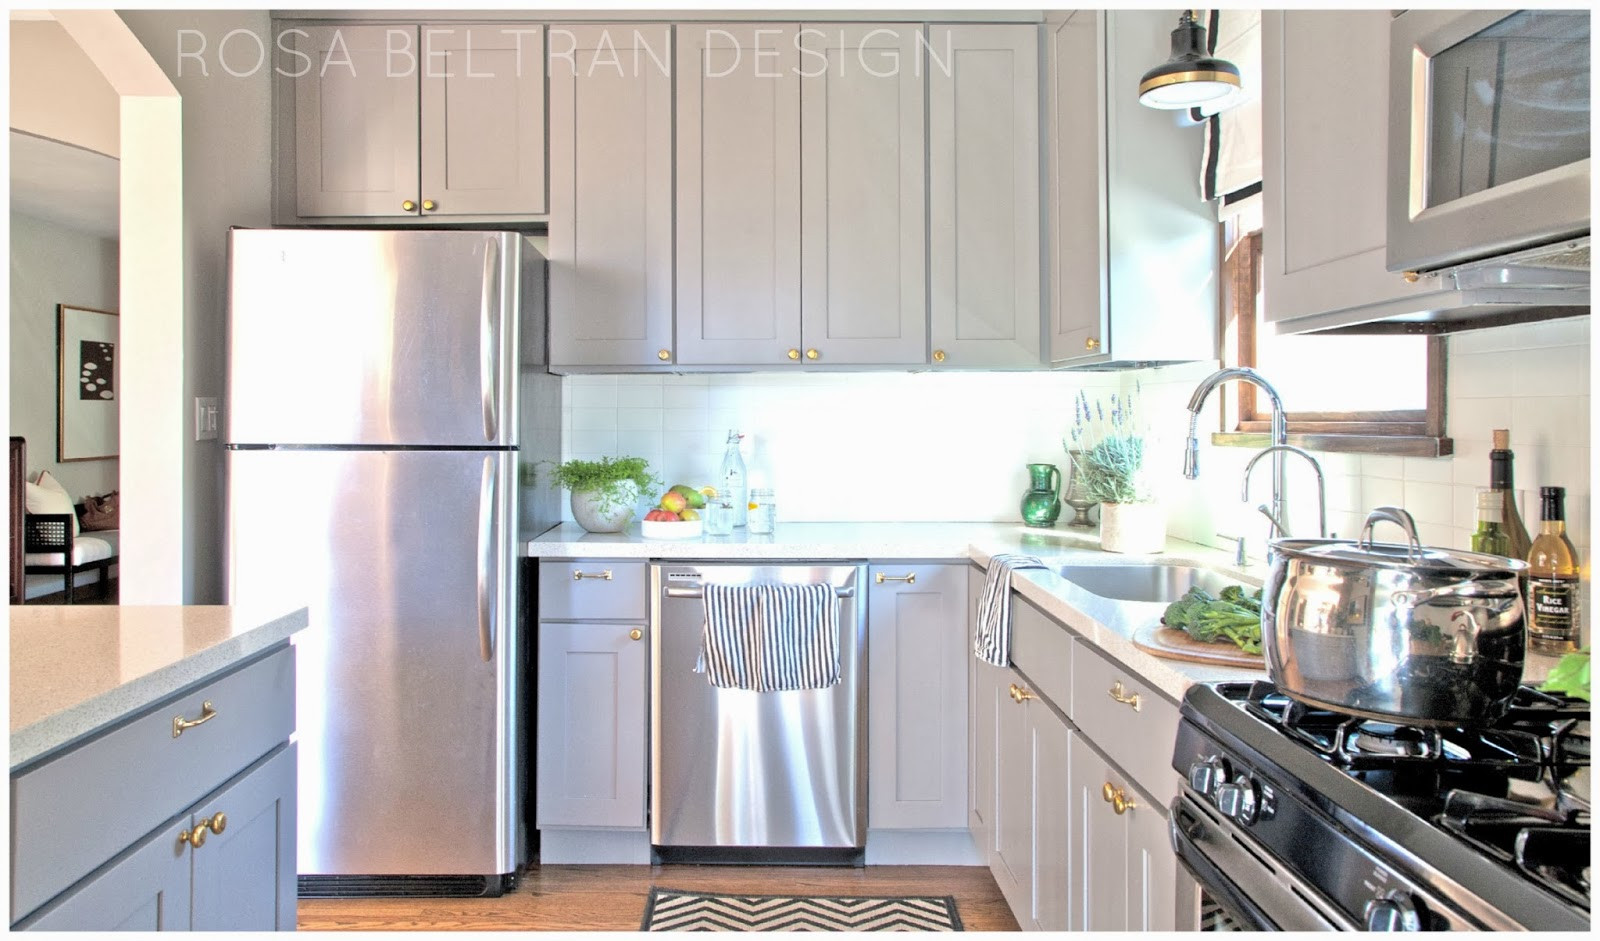 Best ideas about DIY Cabinet Painting
. Save or Pin Rosa Beltran Design DIY PAINTED KITCHEN CABINETS Now.